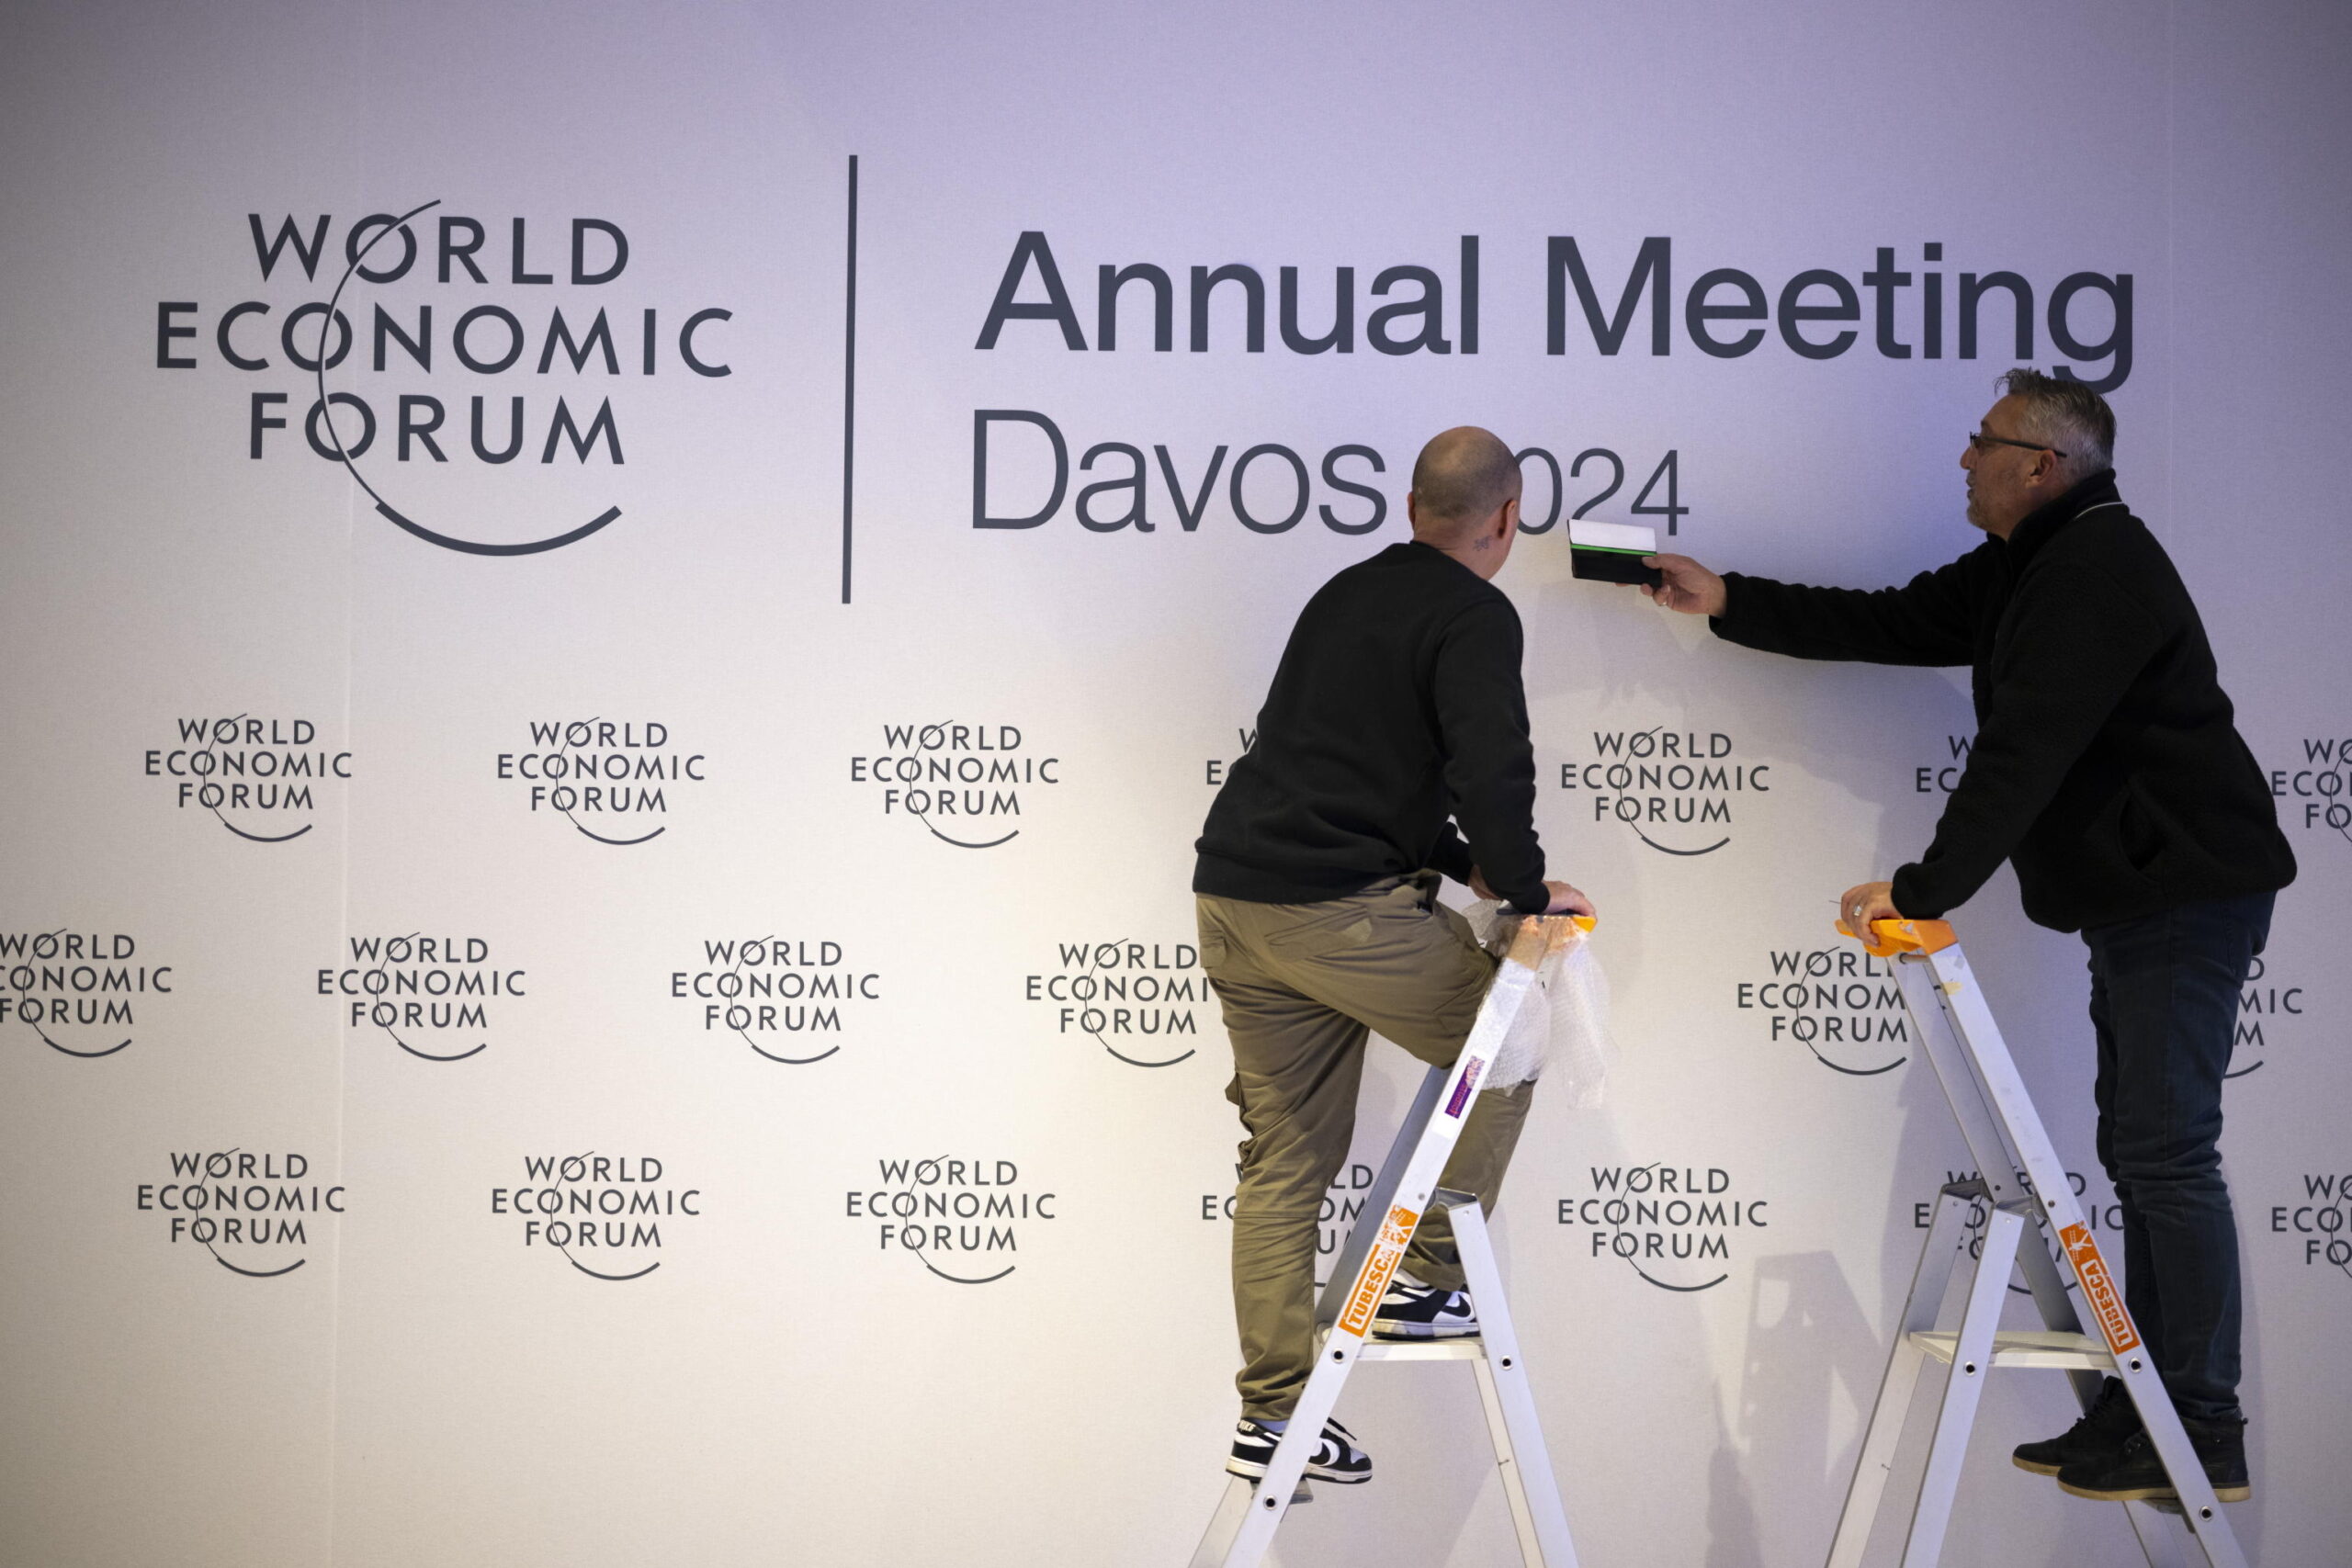 epa11075914 Workers set up letters before the 54th annual meeting of the World Economic Forum (WEF), in Davos, Switzerland, 14 January 2024. The 54th annual meeting of the World Economic Forum (WEF) brings together entrepreneurs, scientists, and corporate and political leaders in Davos under the topic 'Rebuilding Trust' and will run from 15 to 19 January.  EPA/GIAN EHRENZELLER